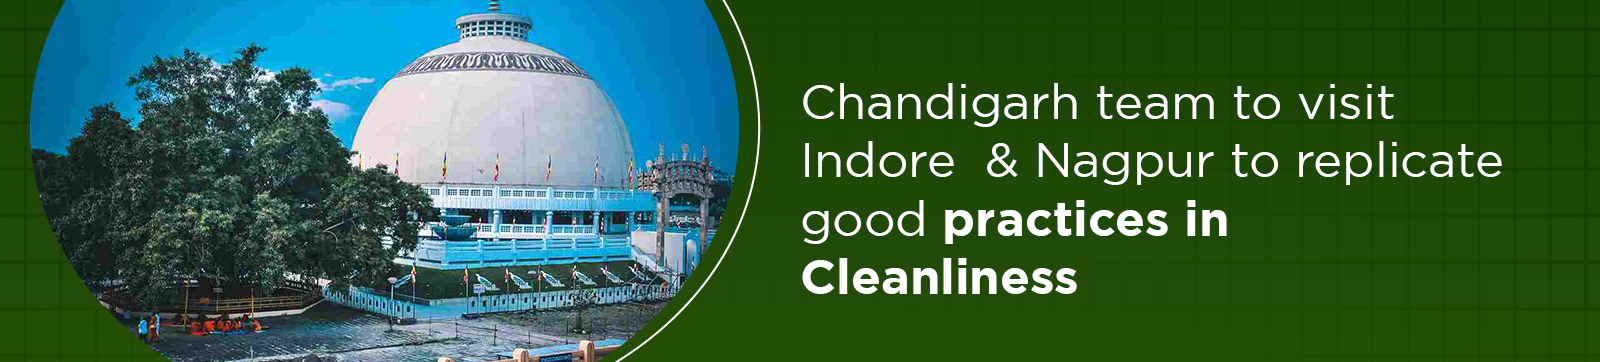 Chandigarh Team to Visit Indore and Nagpur to Replicate Good Practices in Cleanliness